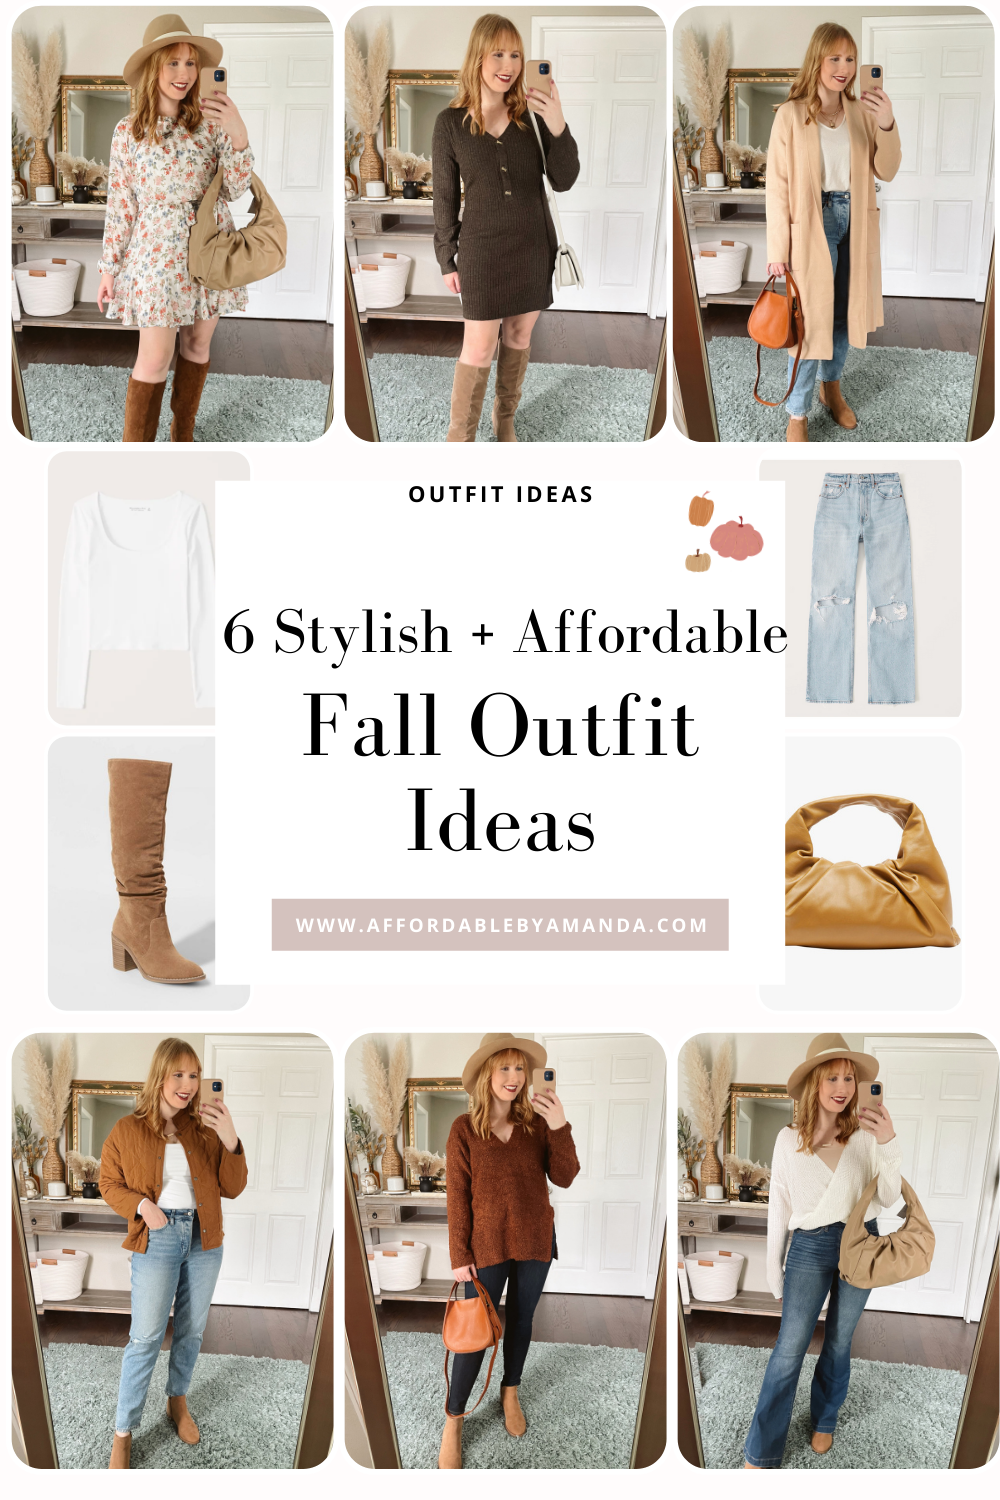 https://affordablebyamanda.com/wp-content/uploads/2021/09/stylish-and-affordable-fall-outfit-ideas.png